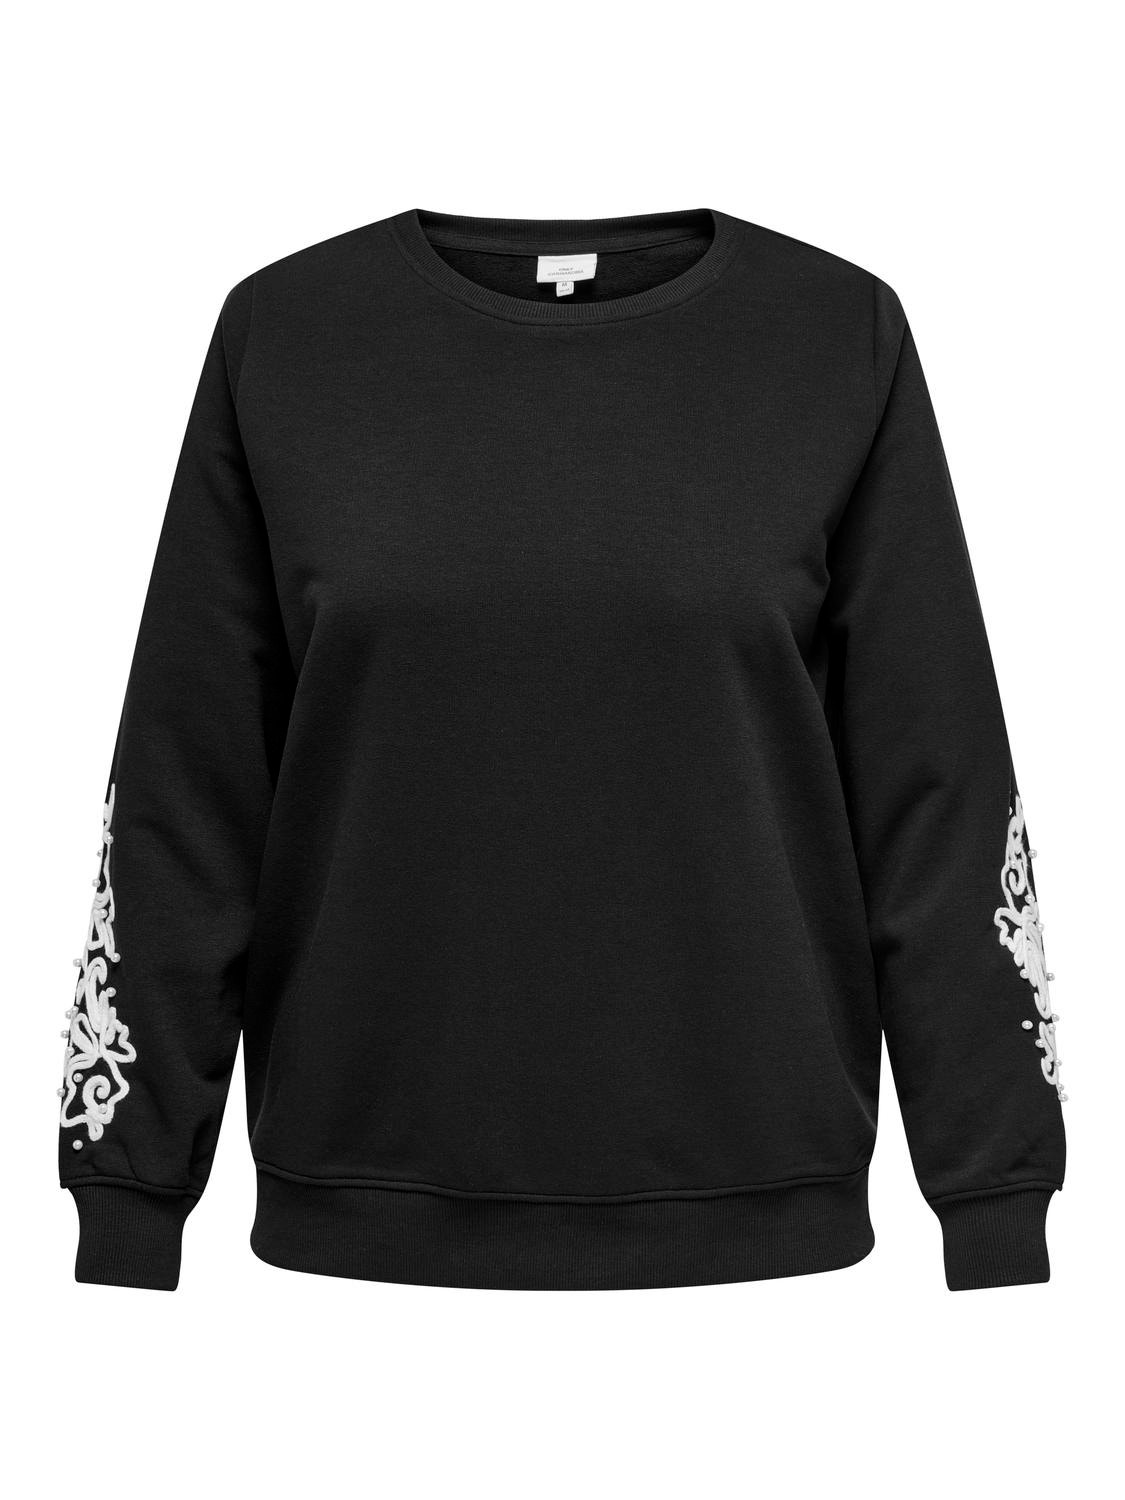 ONLY Regular Fit Round Neck Dropped shoulders Sweatshirts -Black - 15335885